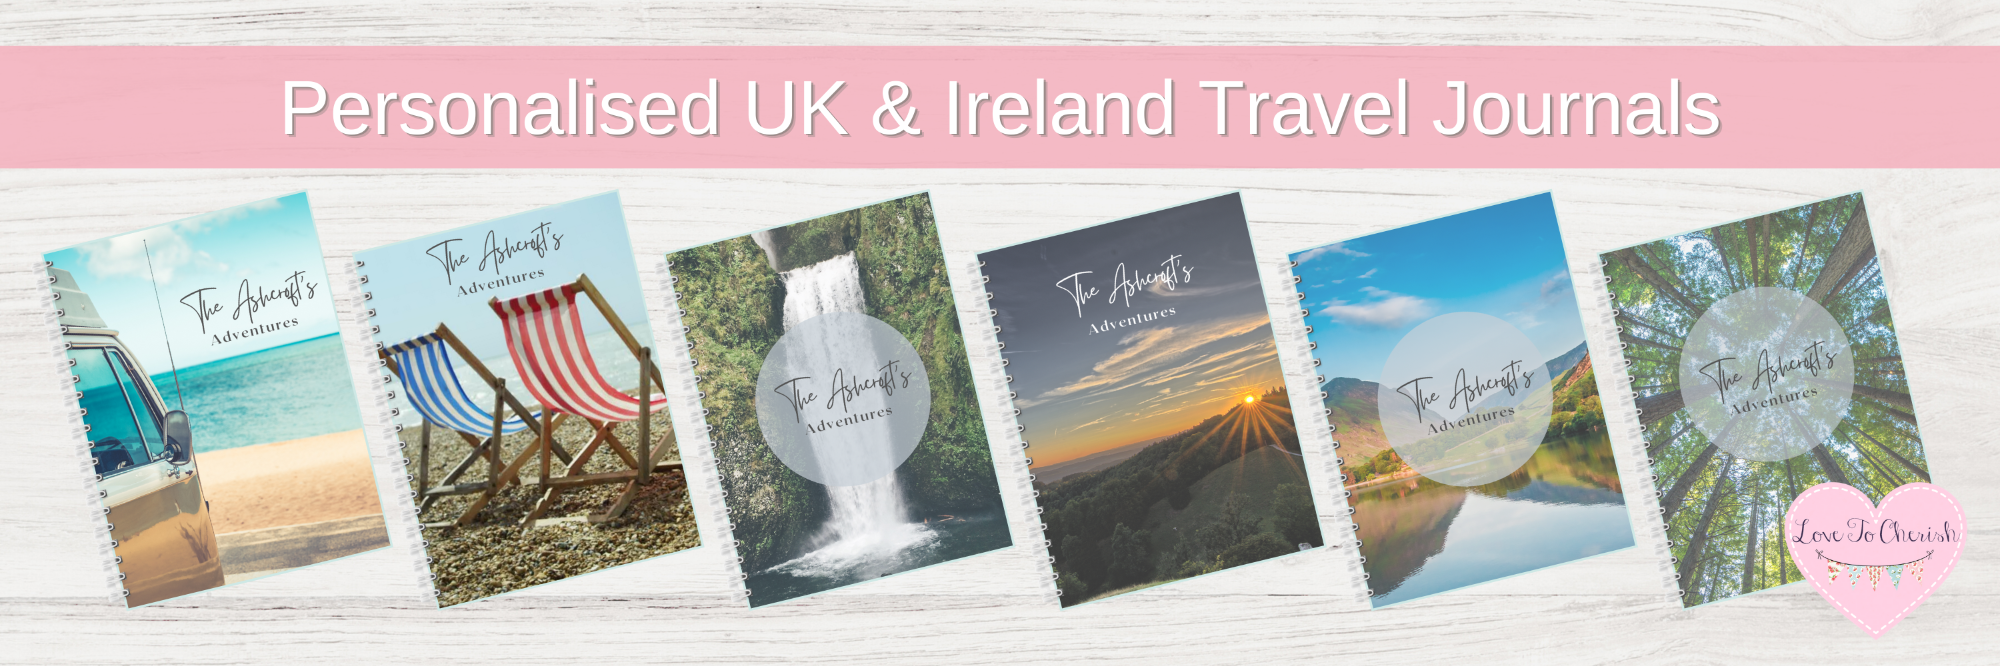 UK and Ireland Travel Journals.png